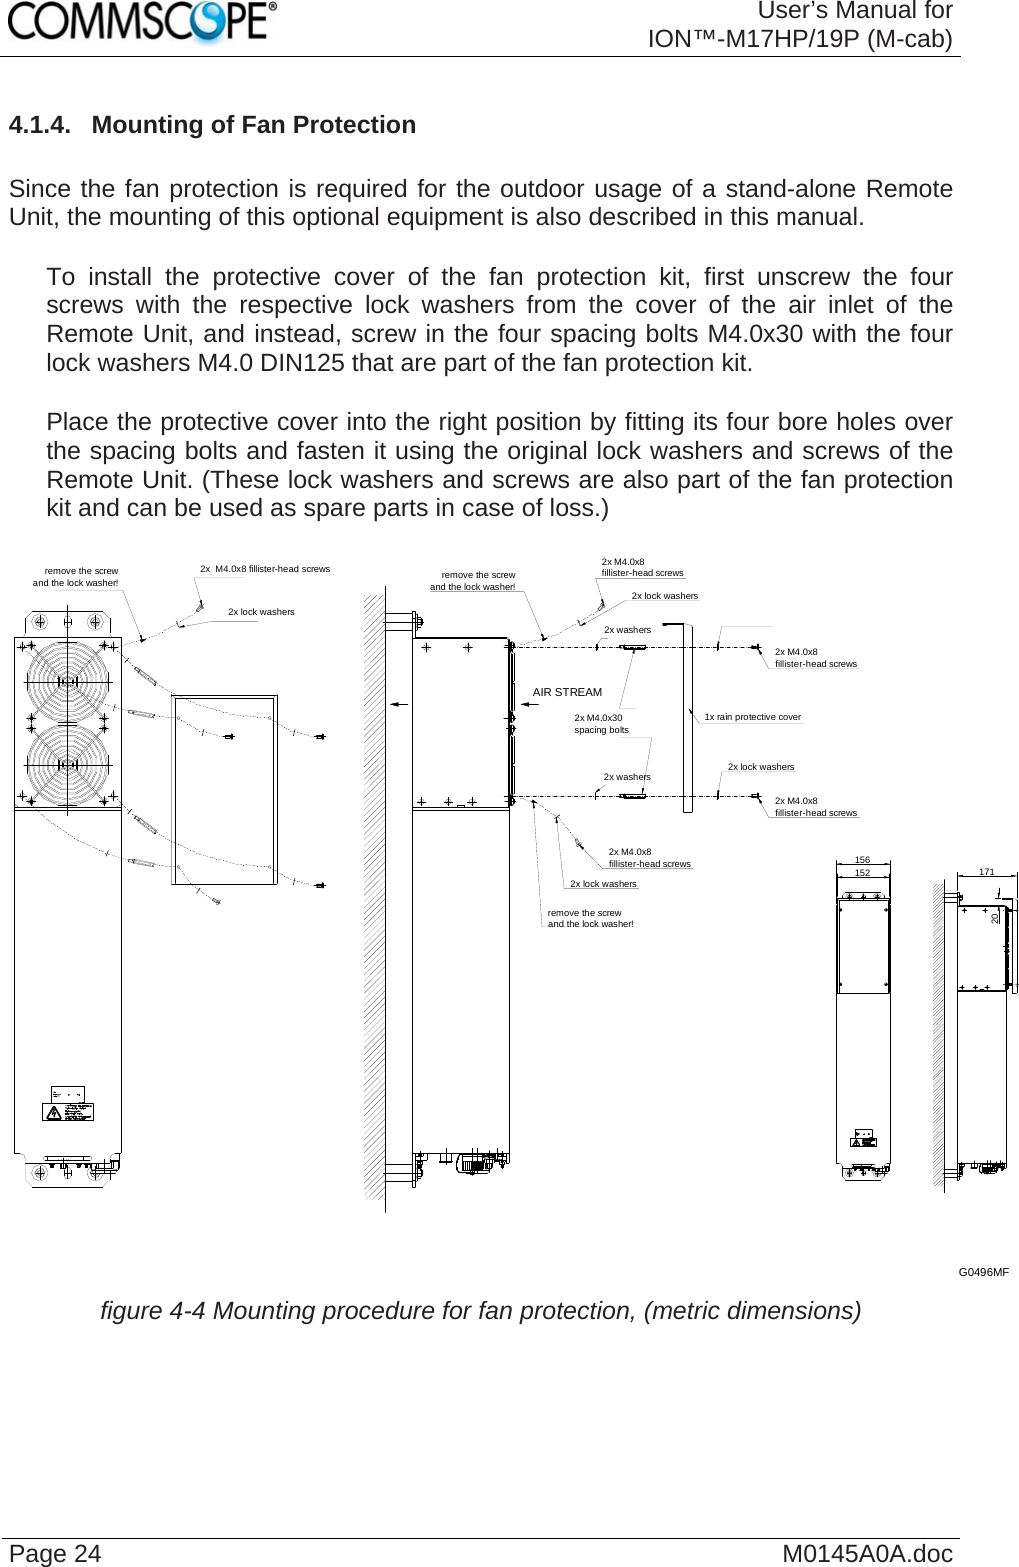  User’s Manual forION™-M17HP/19P (M-cab) Page 24  M0145A0A.doc4.1.4.  Mounting of Fan Protection  Since the fan protection is required for the outdoor usage of a stand-alone Remote Unit, the mounting of this optional equipment is also described in this manual.     To install the protective cover of the fan protection kit, first unscrew the four screws with the respective lock washers from the cover of the air inlet of the Remote Unit, and instead, screw in the four spacing bolts M4.0x30 with the four lock washers M4.0 DIN125 that are part of the fan protection kit.     Place the protective cover into the right position by fitting its four bore holes over the spacing bolts and fasten it using the original lock washers and screws of the Remote Unit. (These lock washers and screws are also part of the fan protection kit and can be used as spare parts in case of loss.)  2x M4.0x8fillister-head screws2x lock washersremove the screwand the lock washer!2x lock washers2x M4.0x8fillister-head screwsremove the screwand the lock washer!2x M4.0x8fillister-head screws1x rain protective cover2x lock washers2x M4.0x8fillister-head screws2x  M4.0x8 fillister-head screws2x lock washersremove the screwand the lock washer!2x washers2x washers156152 17120AIR STREAM2x M4.0x30spacing boltsG0496MF  figure 4-4 Mounting procedure for fan protection, (metric dimensions)   